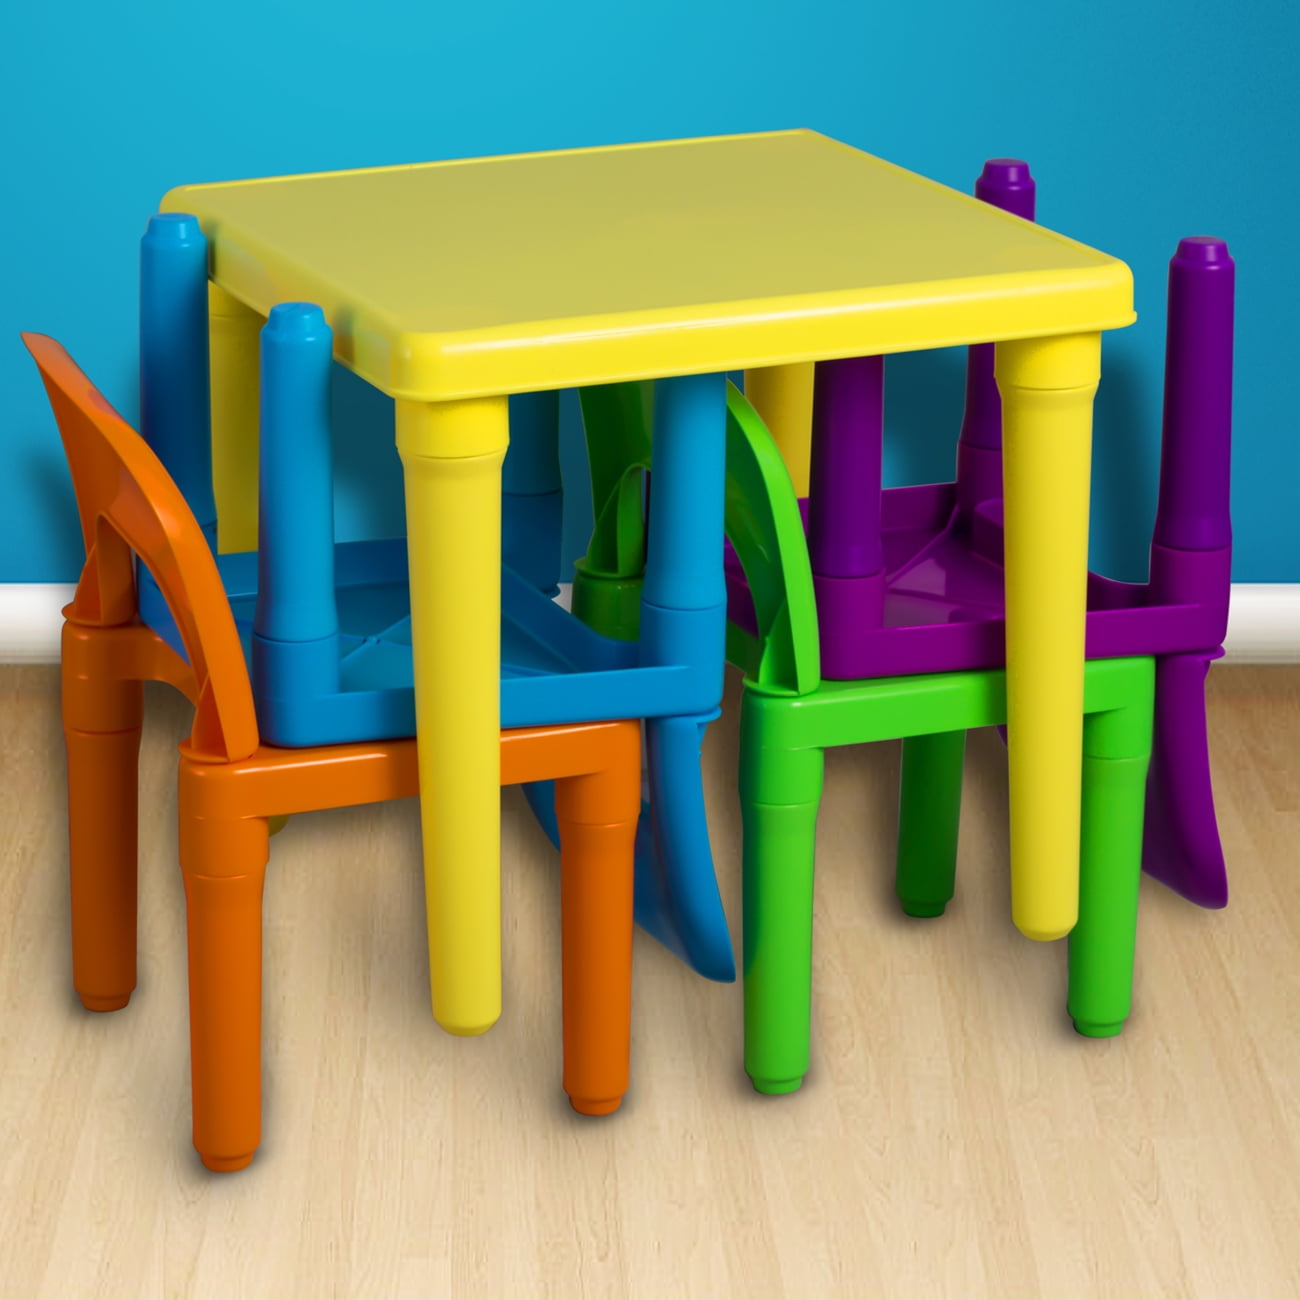 Den Haven Kids Table And Chairs Play Set Colorful Child Toy Activity Desk For Toddler Sturdy Plastic Walmartcom Walmartcom